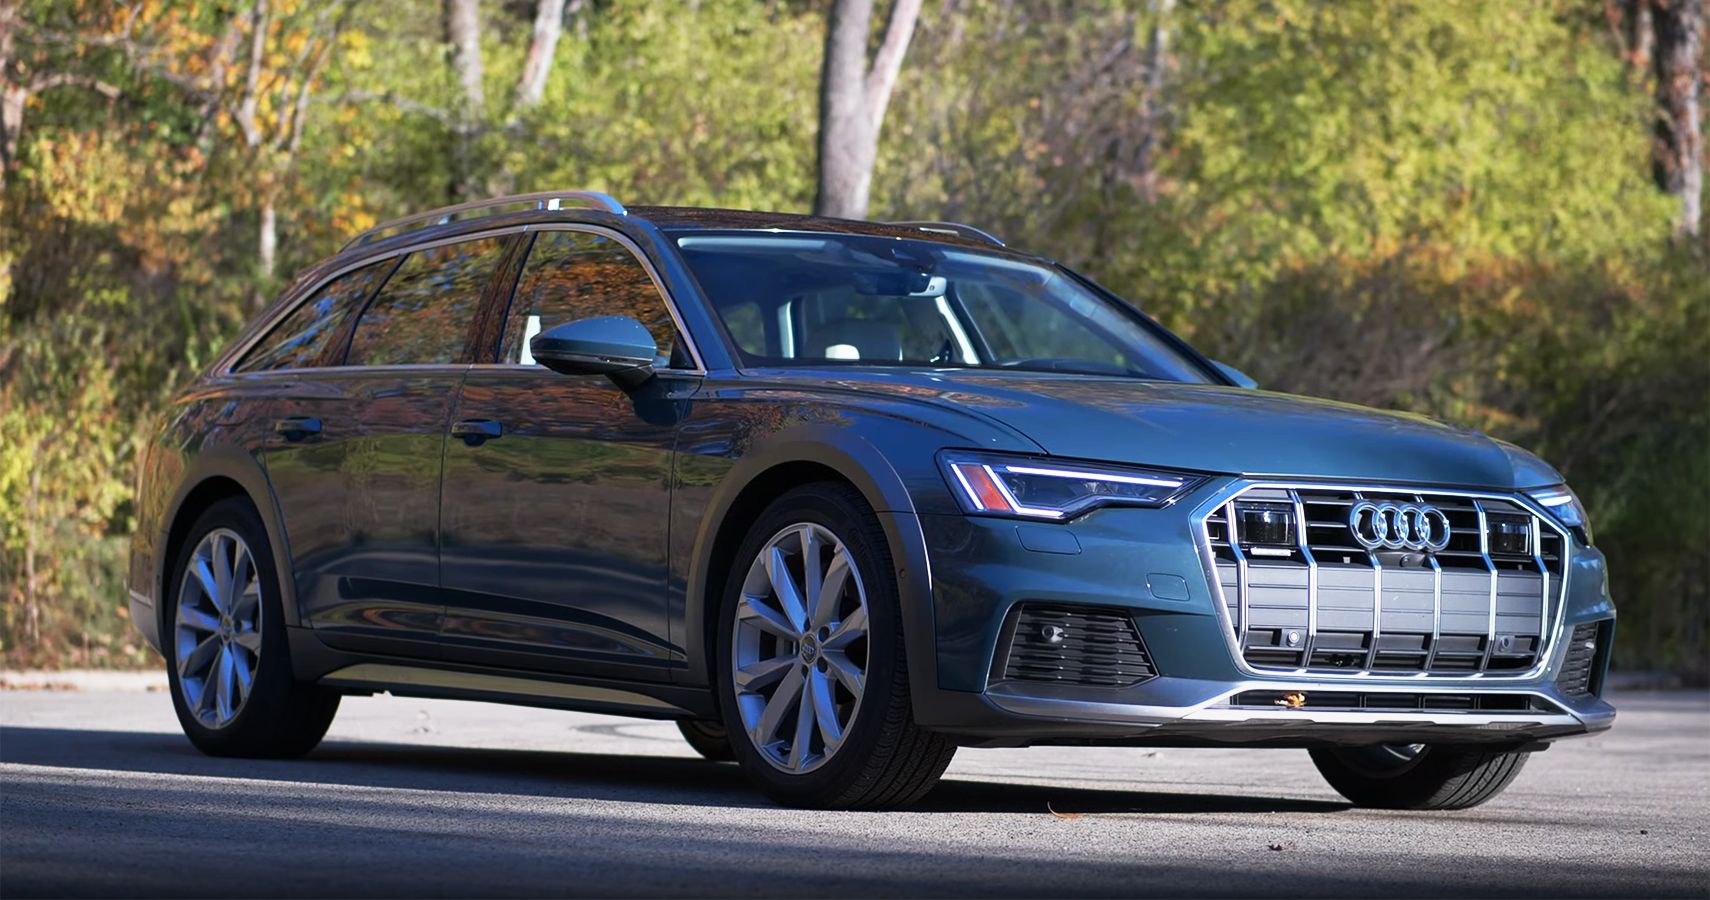 The Ultimate Off Road Wagon: Why We Love The 2022 Audi A6 Allroad